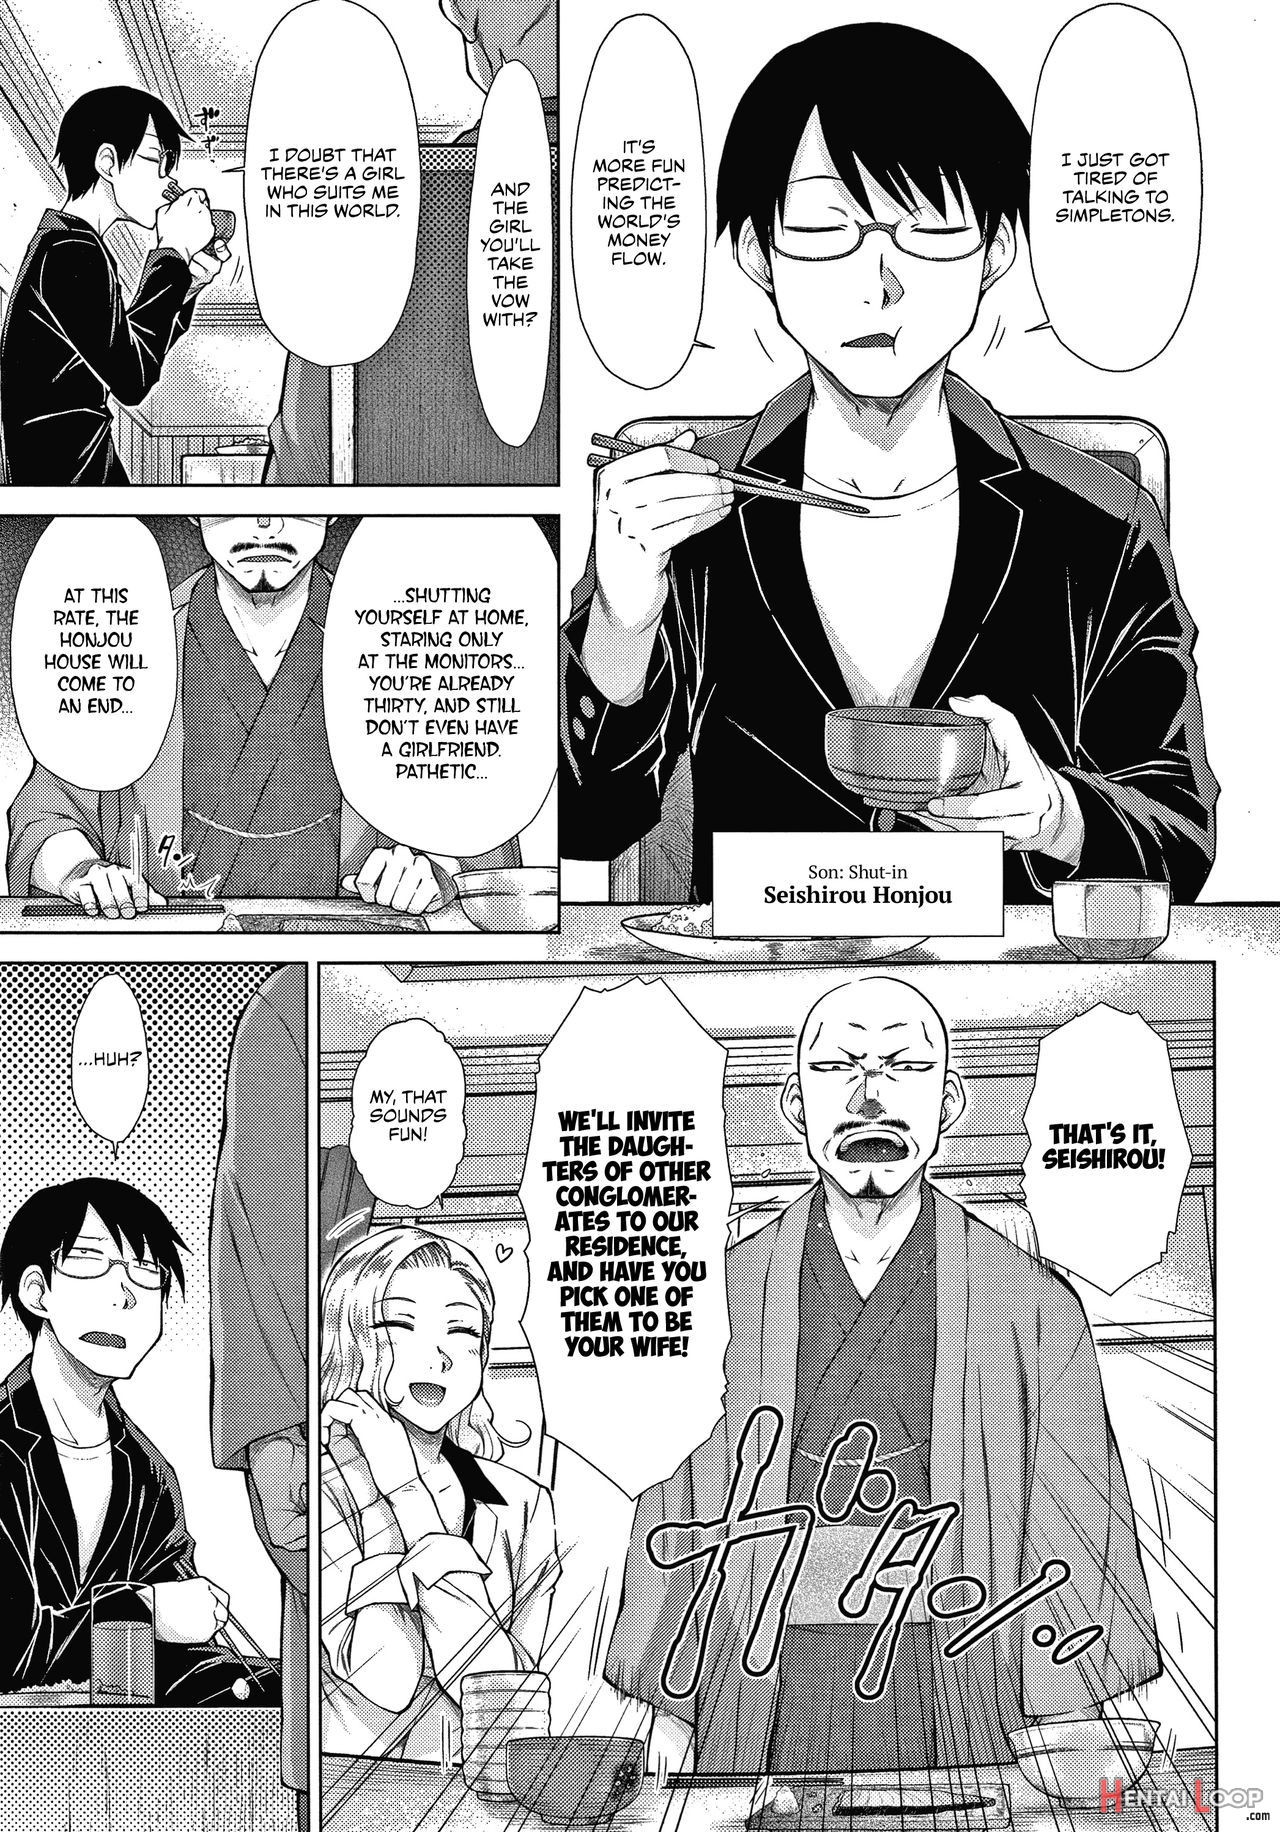 The Top-tier Hikki Heir's Hubby-hunting Harem page 9